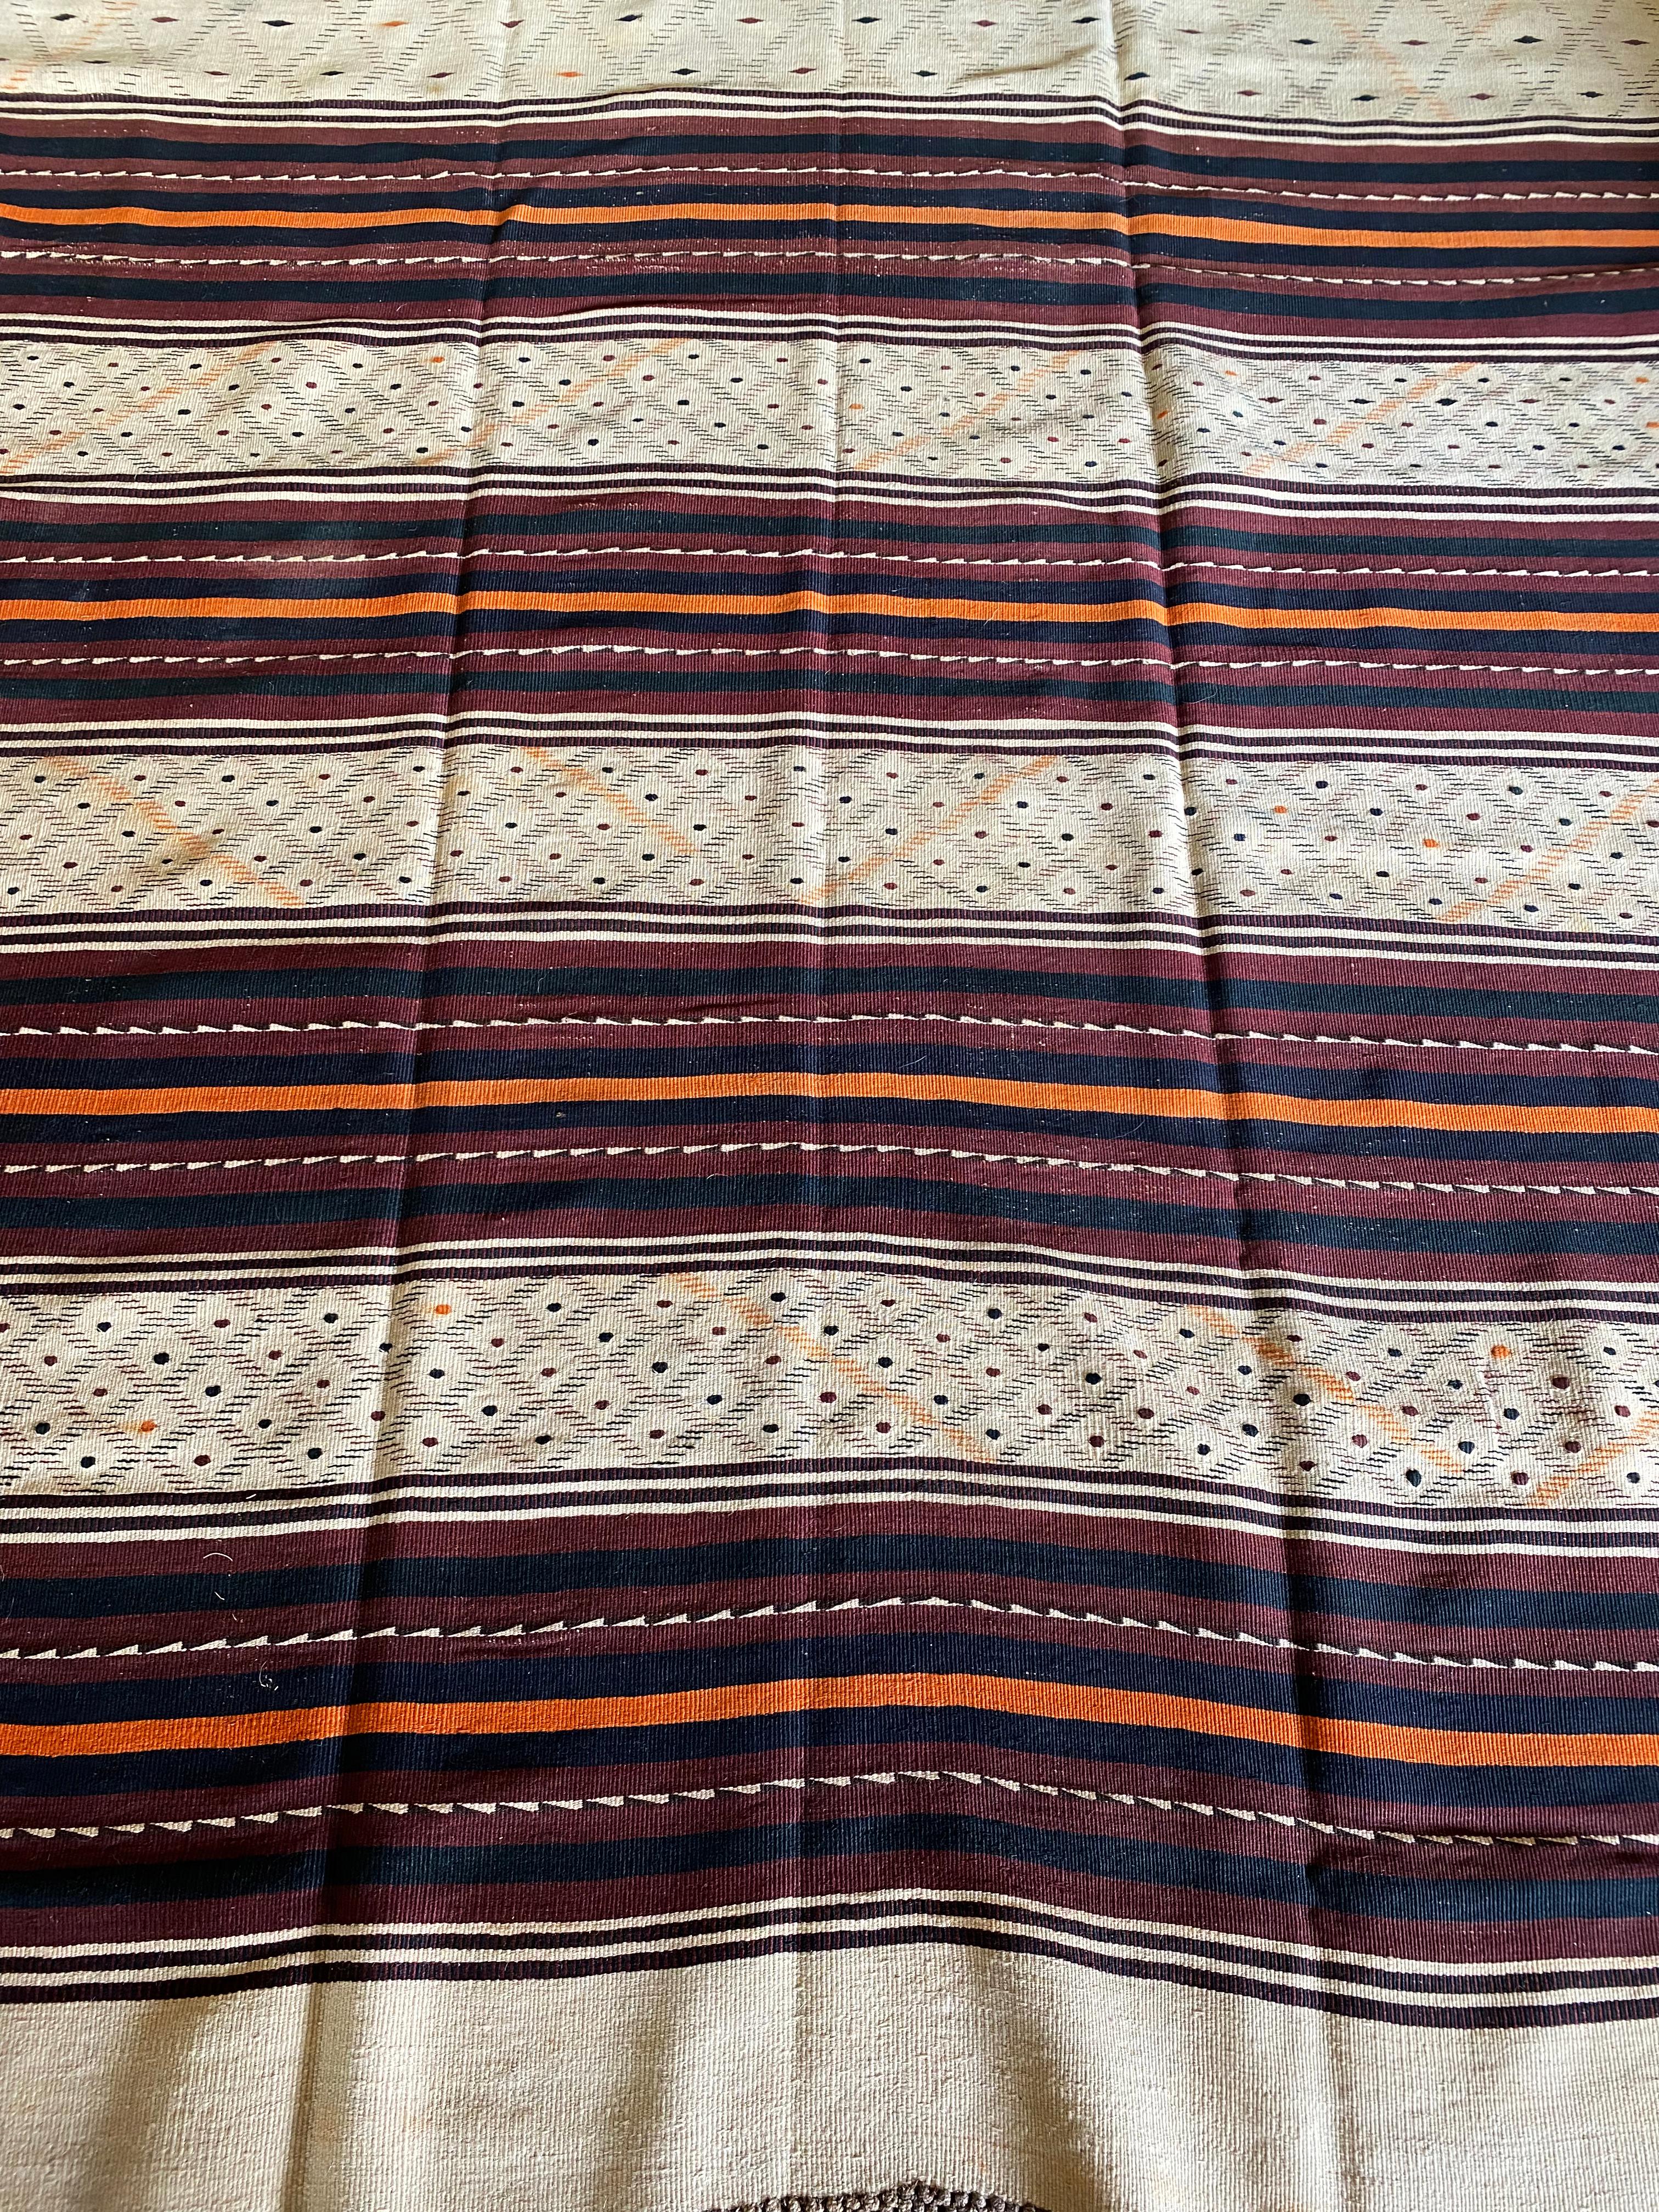 This large antique Uzbekistan Tartari Safid Kilim was crafted from the prolific and diverse Uzbek weavers of Sar-i-Pul. It was crafted using a distinct weave double-interlock technique. Safid means white and these kilims have unusually large areas